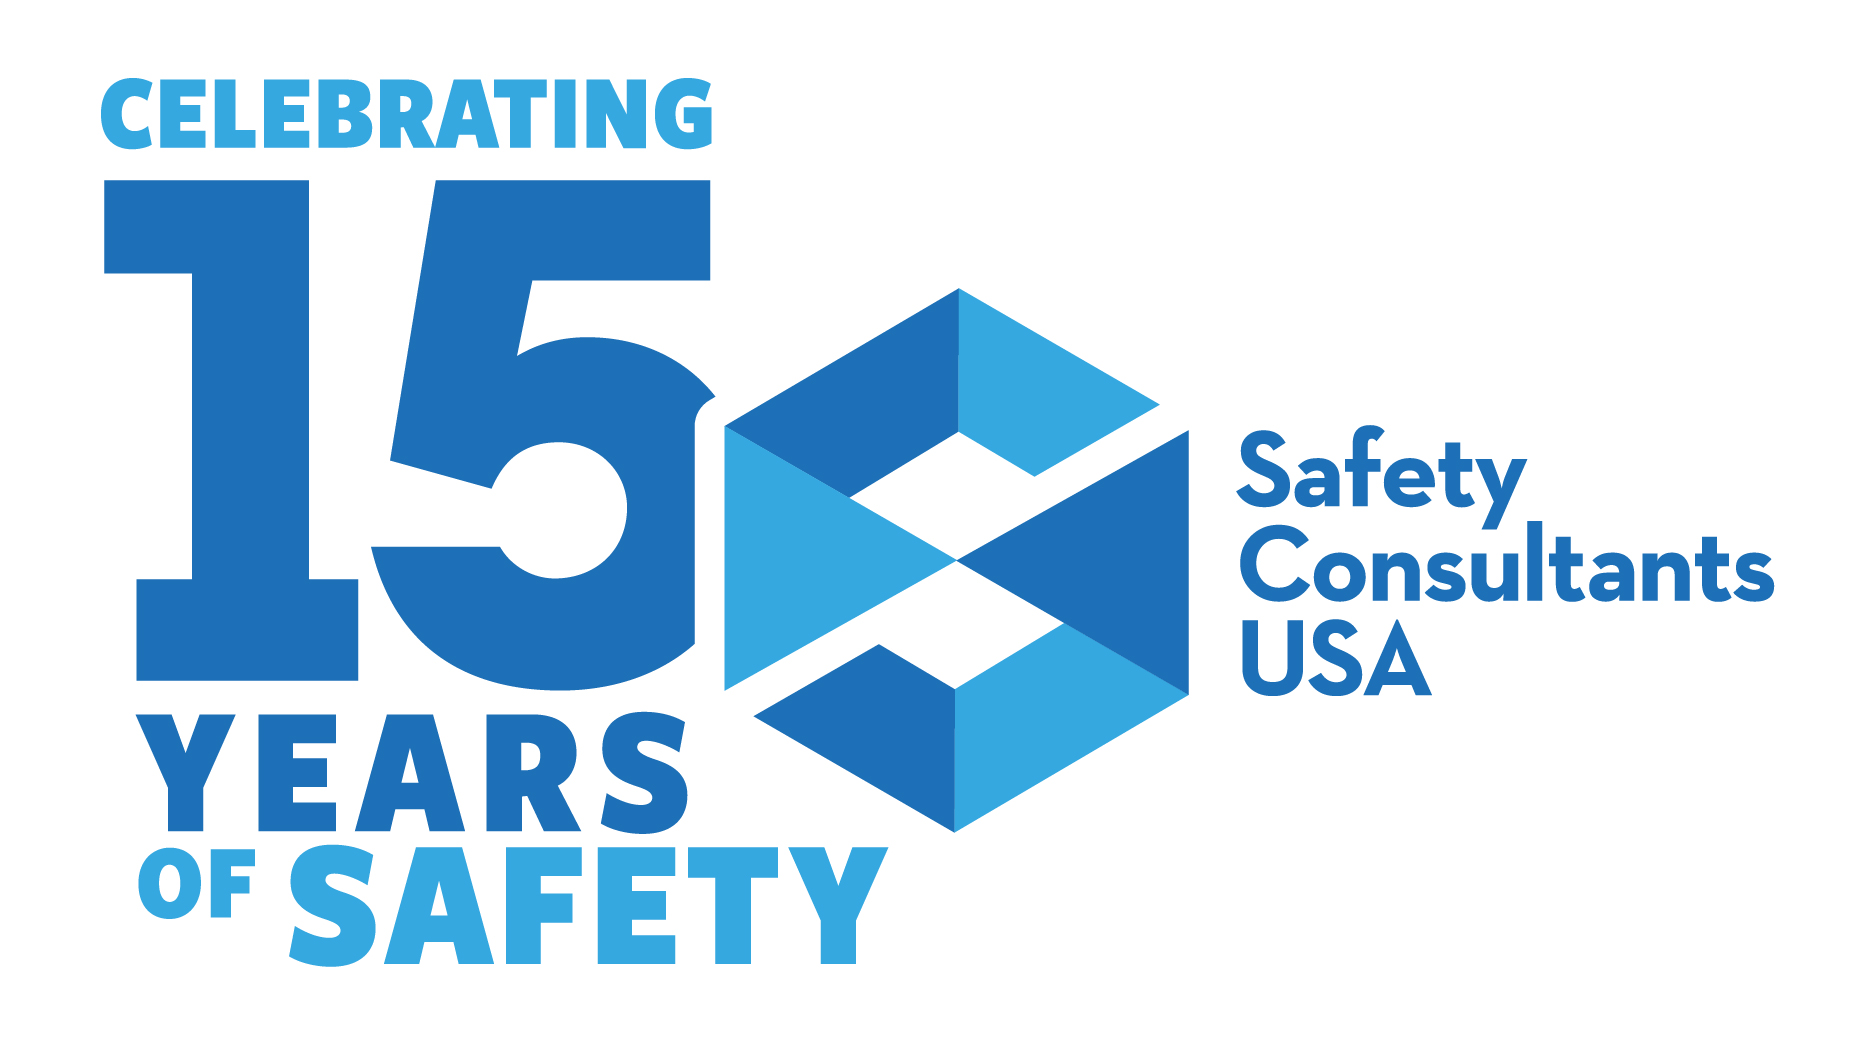 Safety Consultants USA